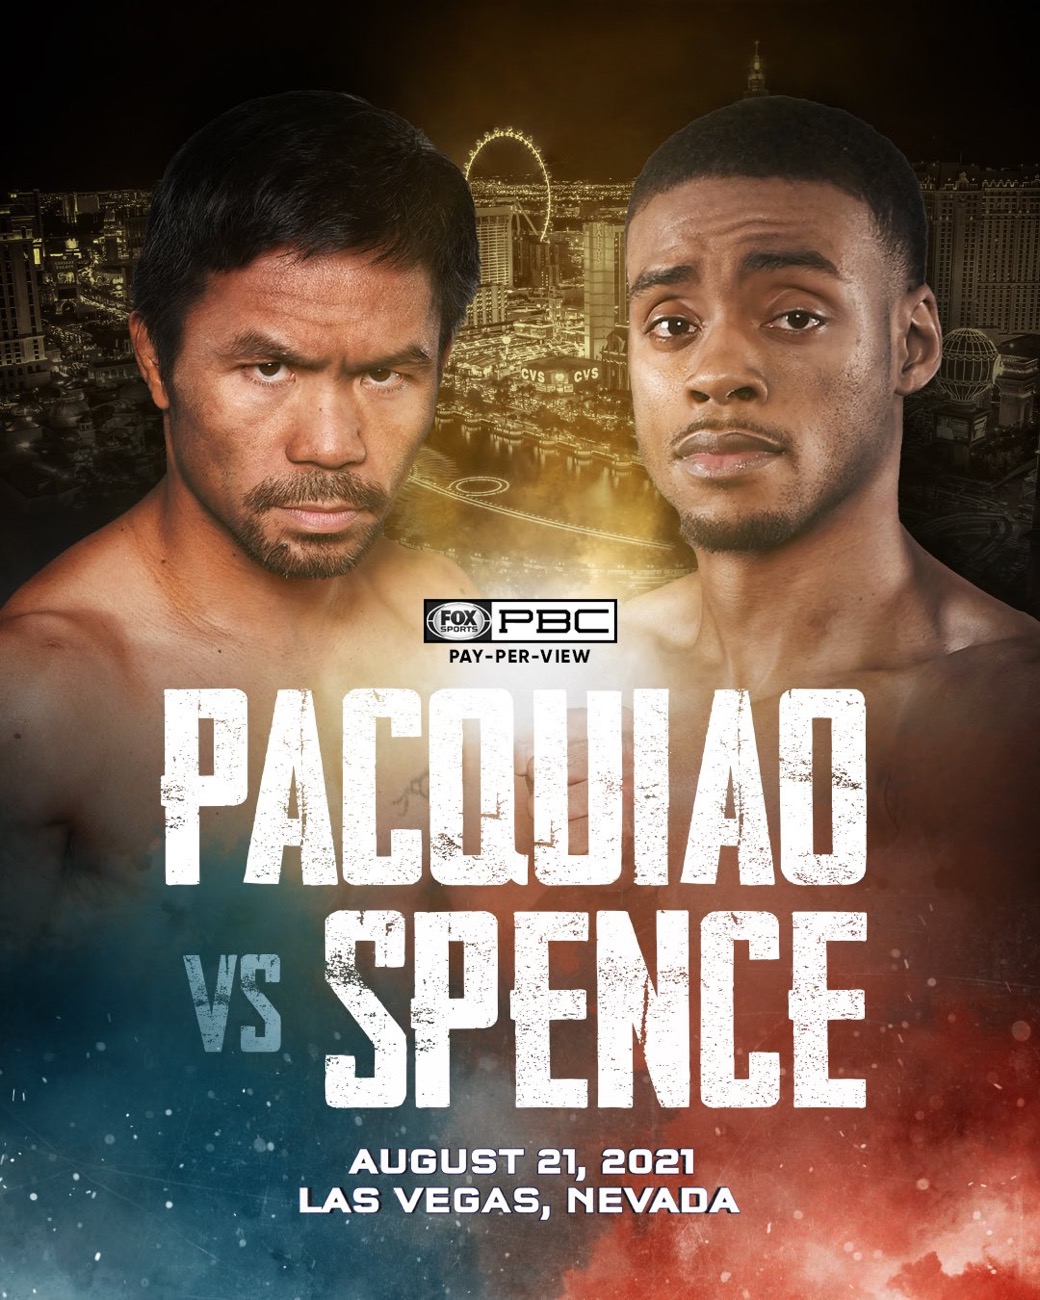 Nine Times In His Career, Manny Pacquiao Has Taken An Opponent's “O” - Will Spence Be Number Ten?